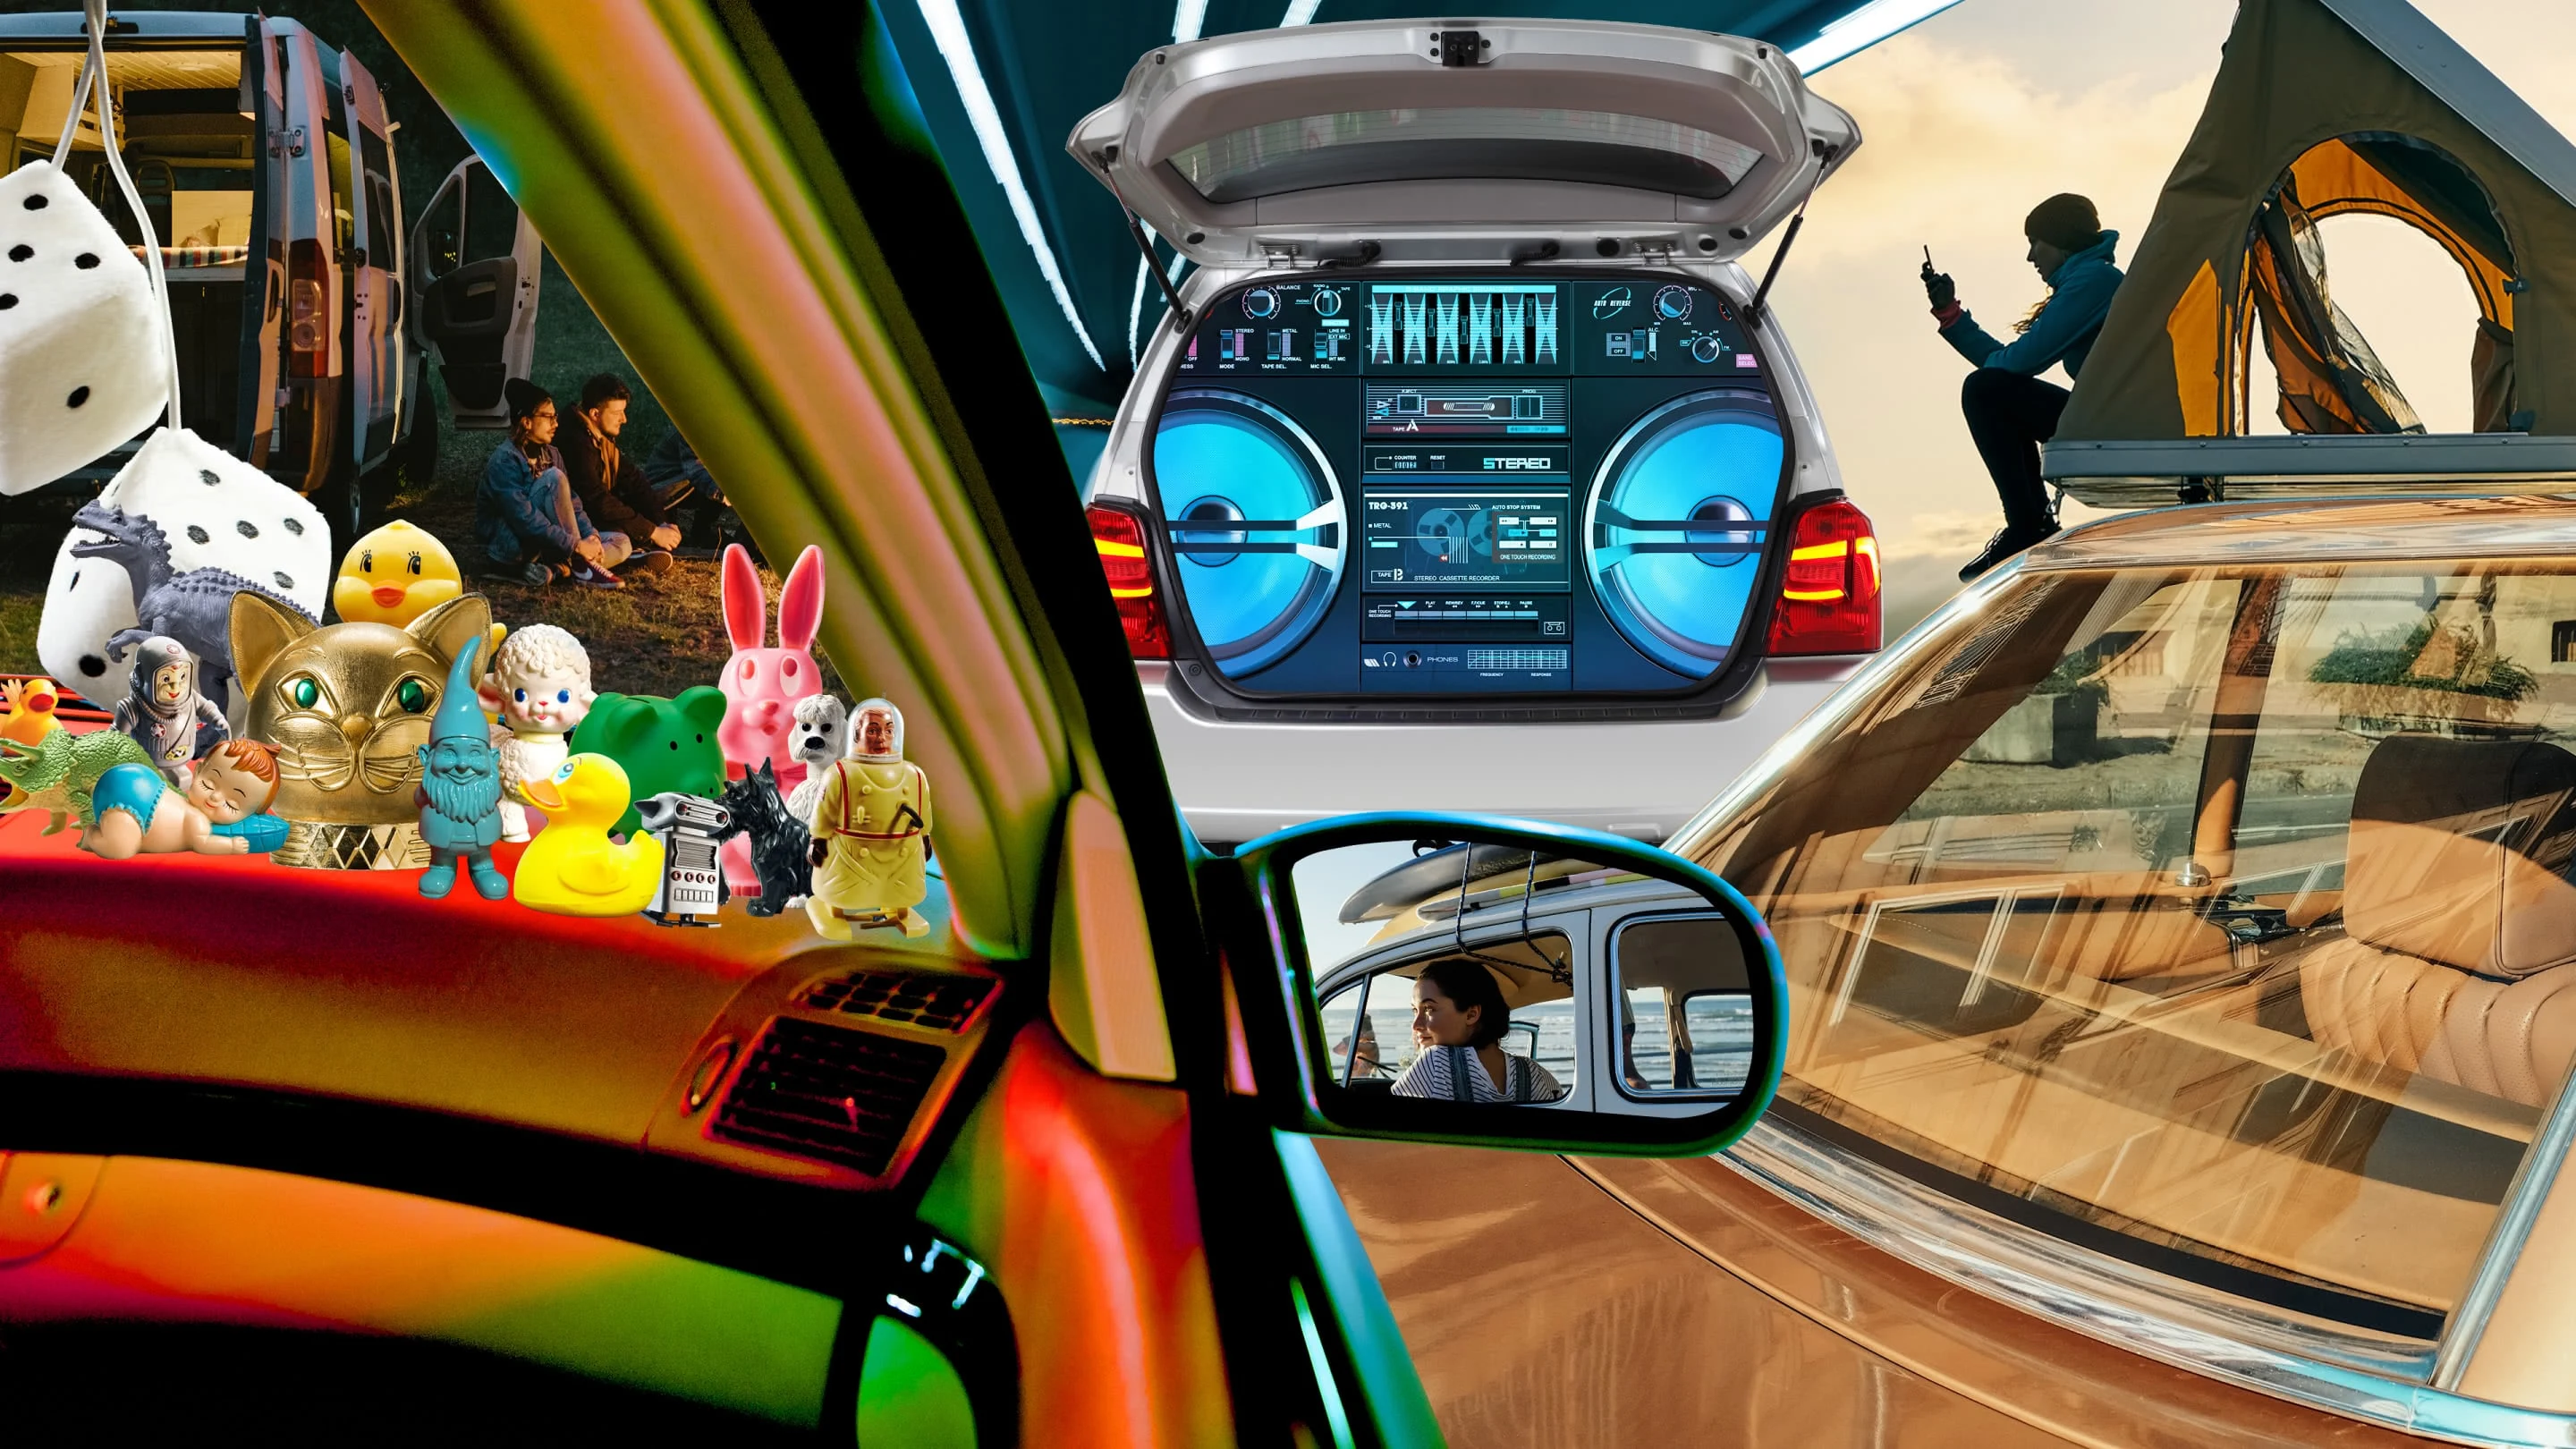 Collage of cars. Figurines and toys on a dashboard. Woman in the center viewed through a driver’s rear-view mirror. Hatchback raised to show a boom box, person on a cellphone near a tent and view through the rear of a car window to the right.